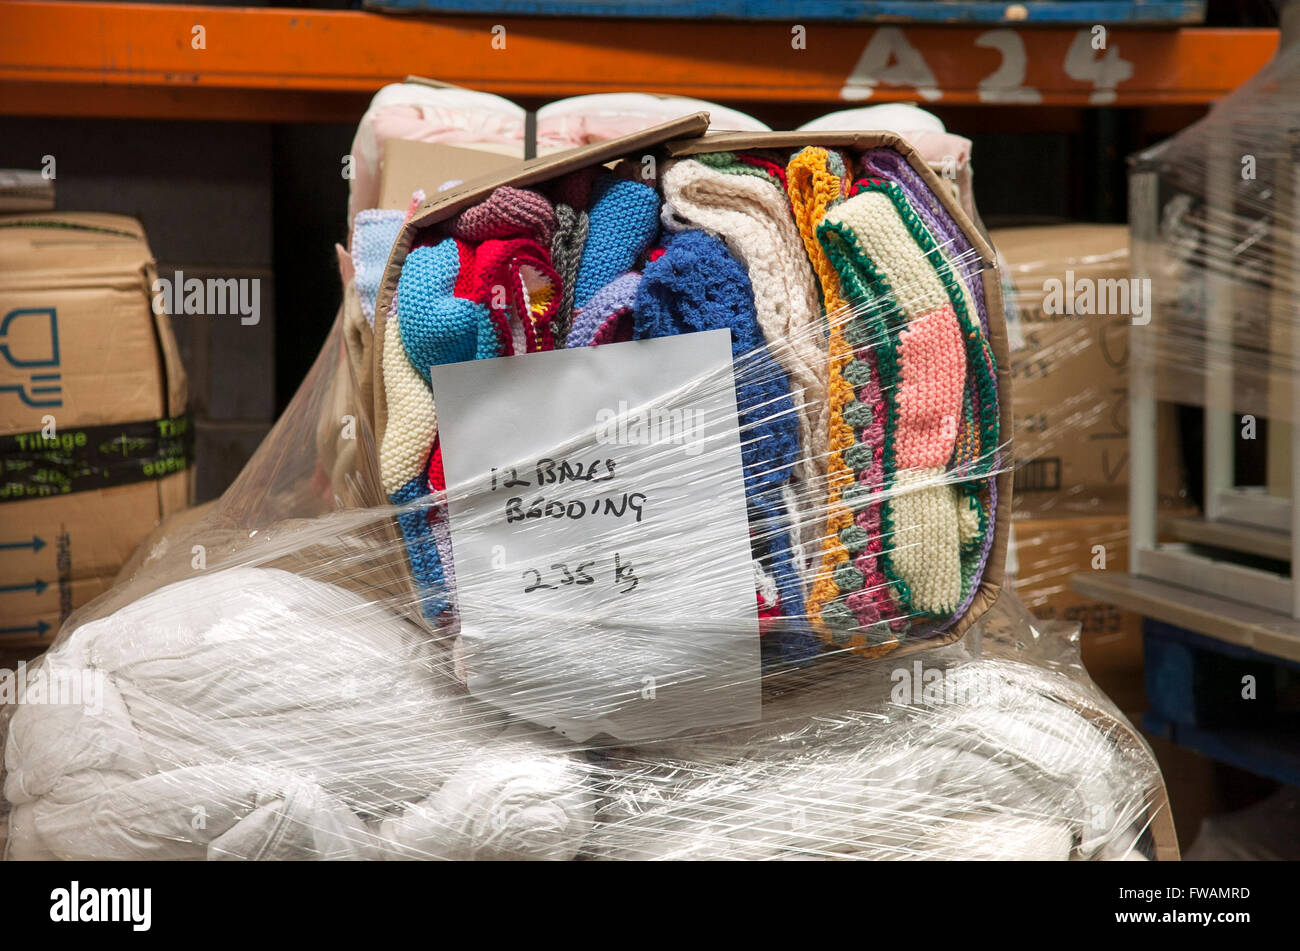 Much Hoole, Preston, Lancashire. A bale of hand knitted colourful blankets wait at the International Aid Trust warehouse, ready to be donated to those that need them. The charity raise funds and aid for humanitarian causes across the globe. Stock Photo